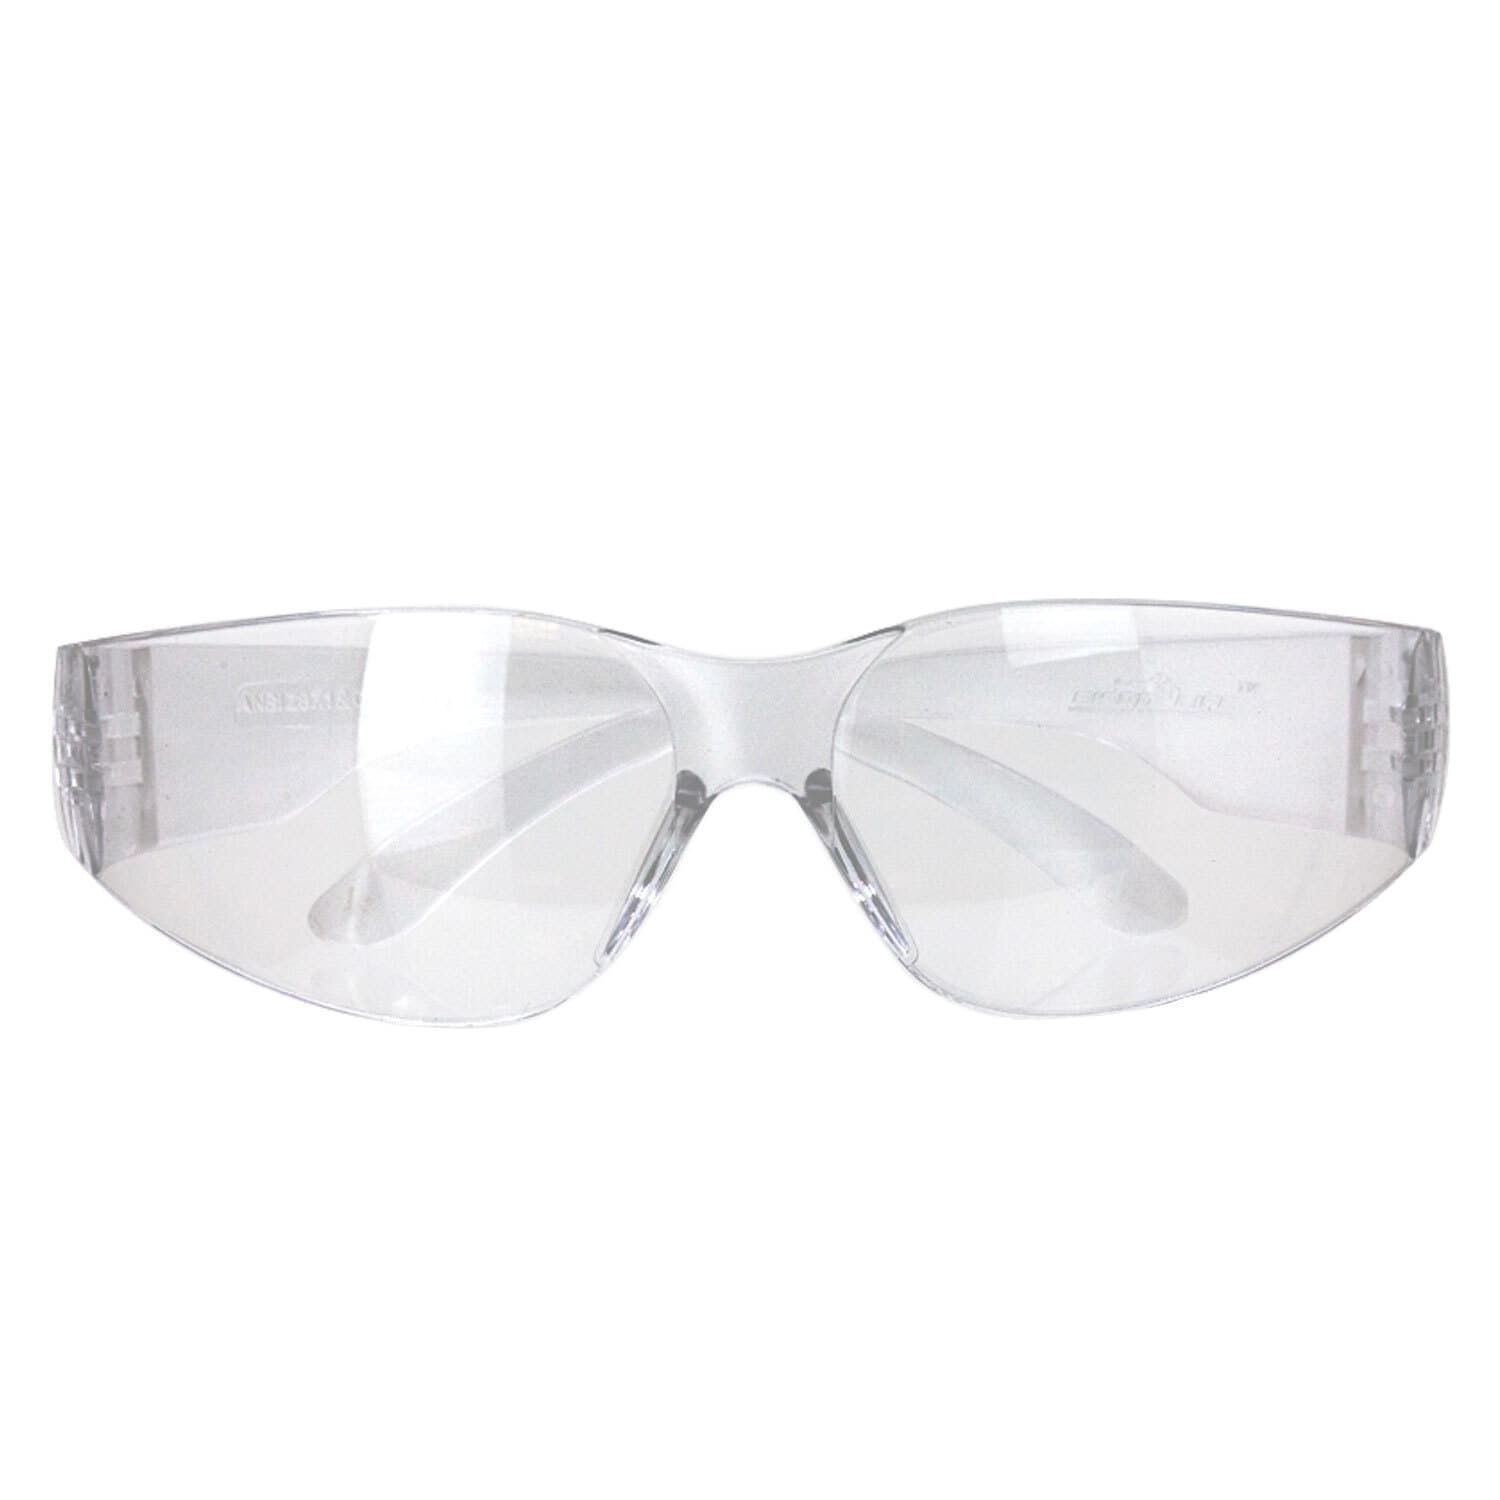 Polycarbonate Frame Eye Protection at